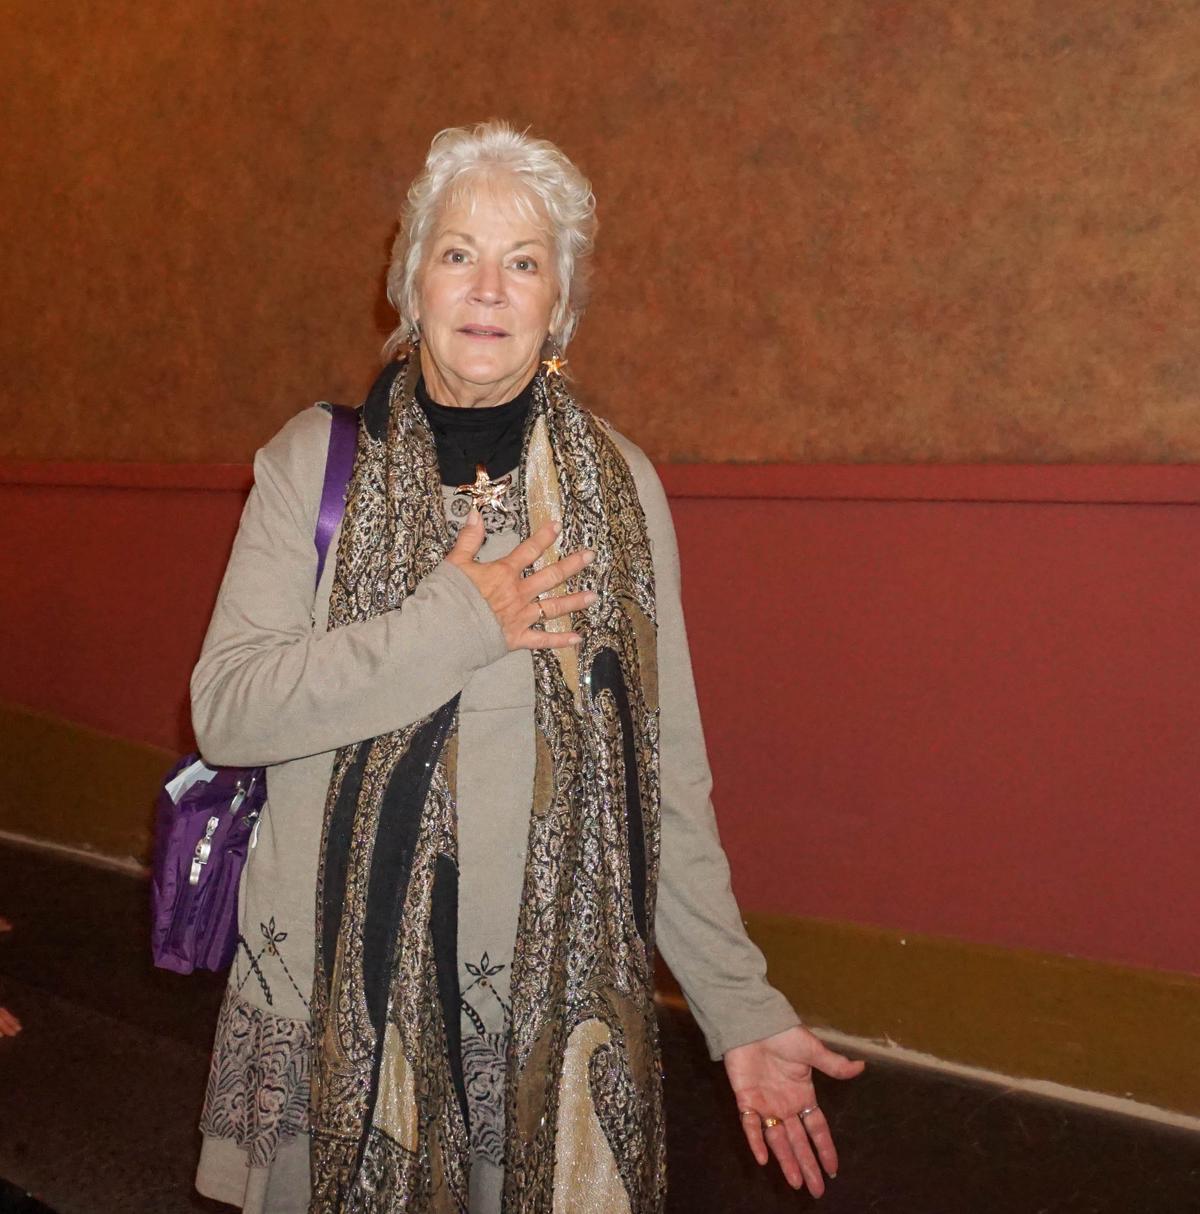 Mrs. Patricia Eriksen said, "I am going to put my hand on my heart because I have been touched so deeply." She had just seen Shen Yun Performing Arts at the Orpheum Theatre in Minneapolis on Feb. 21, 2016. (Valerie Avore/Epoch Times)